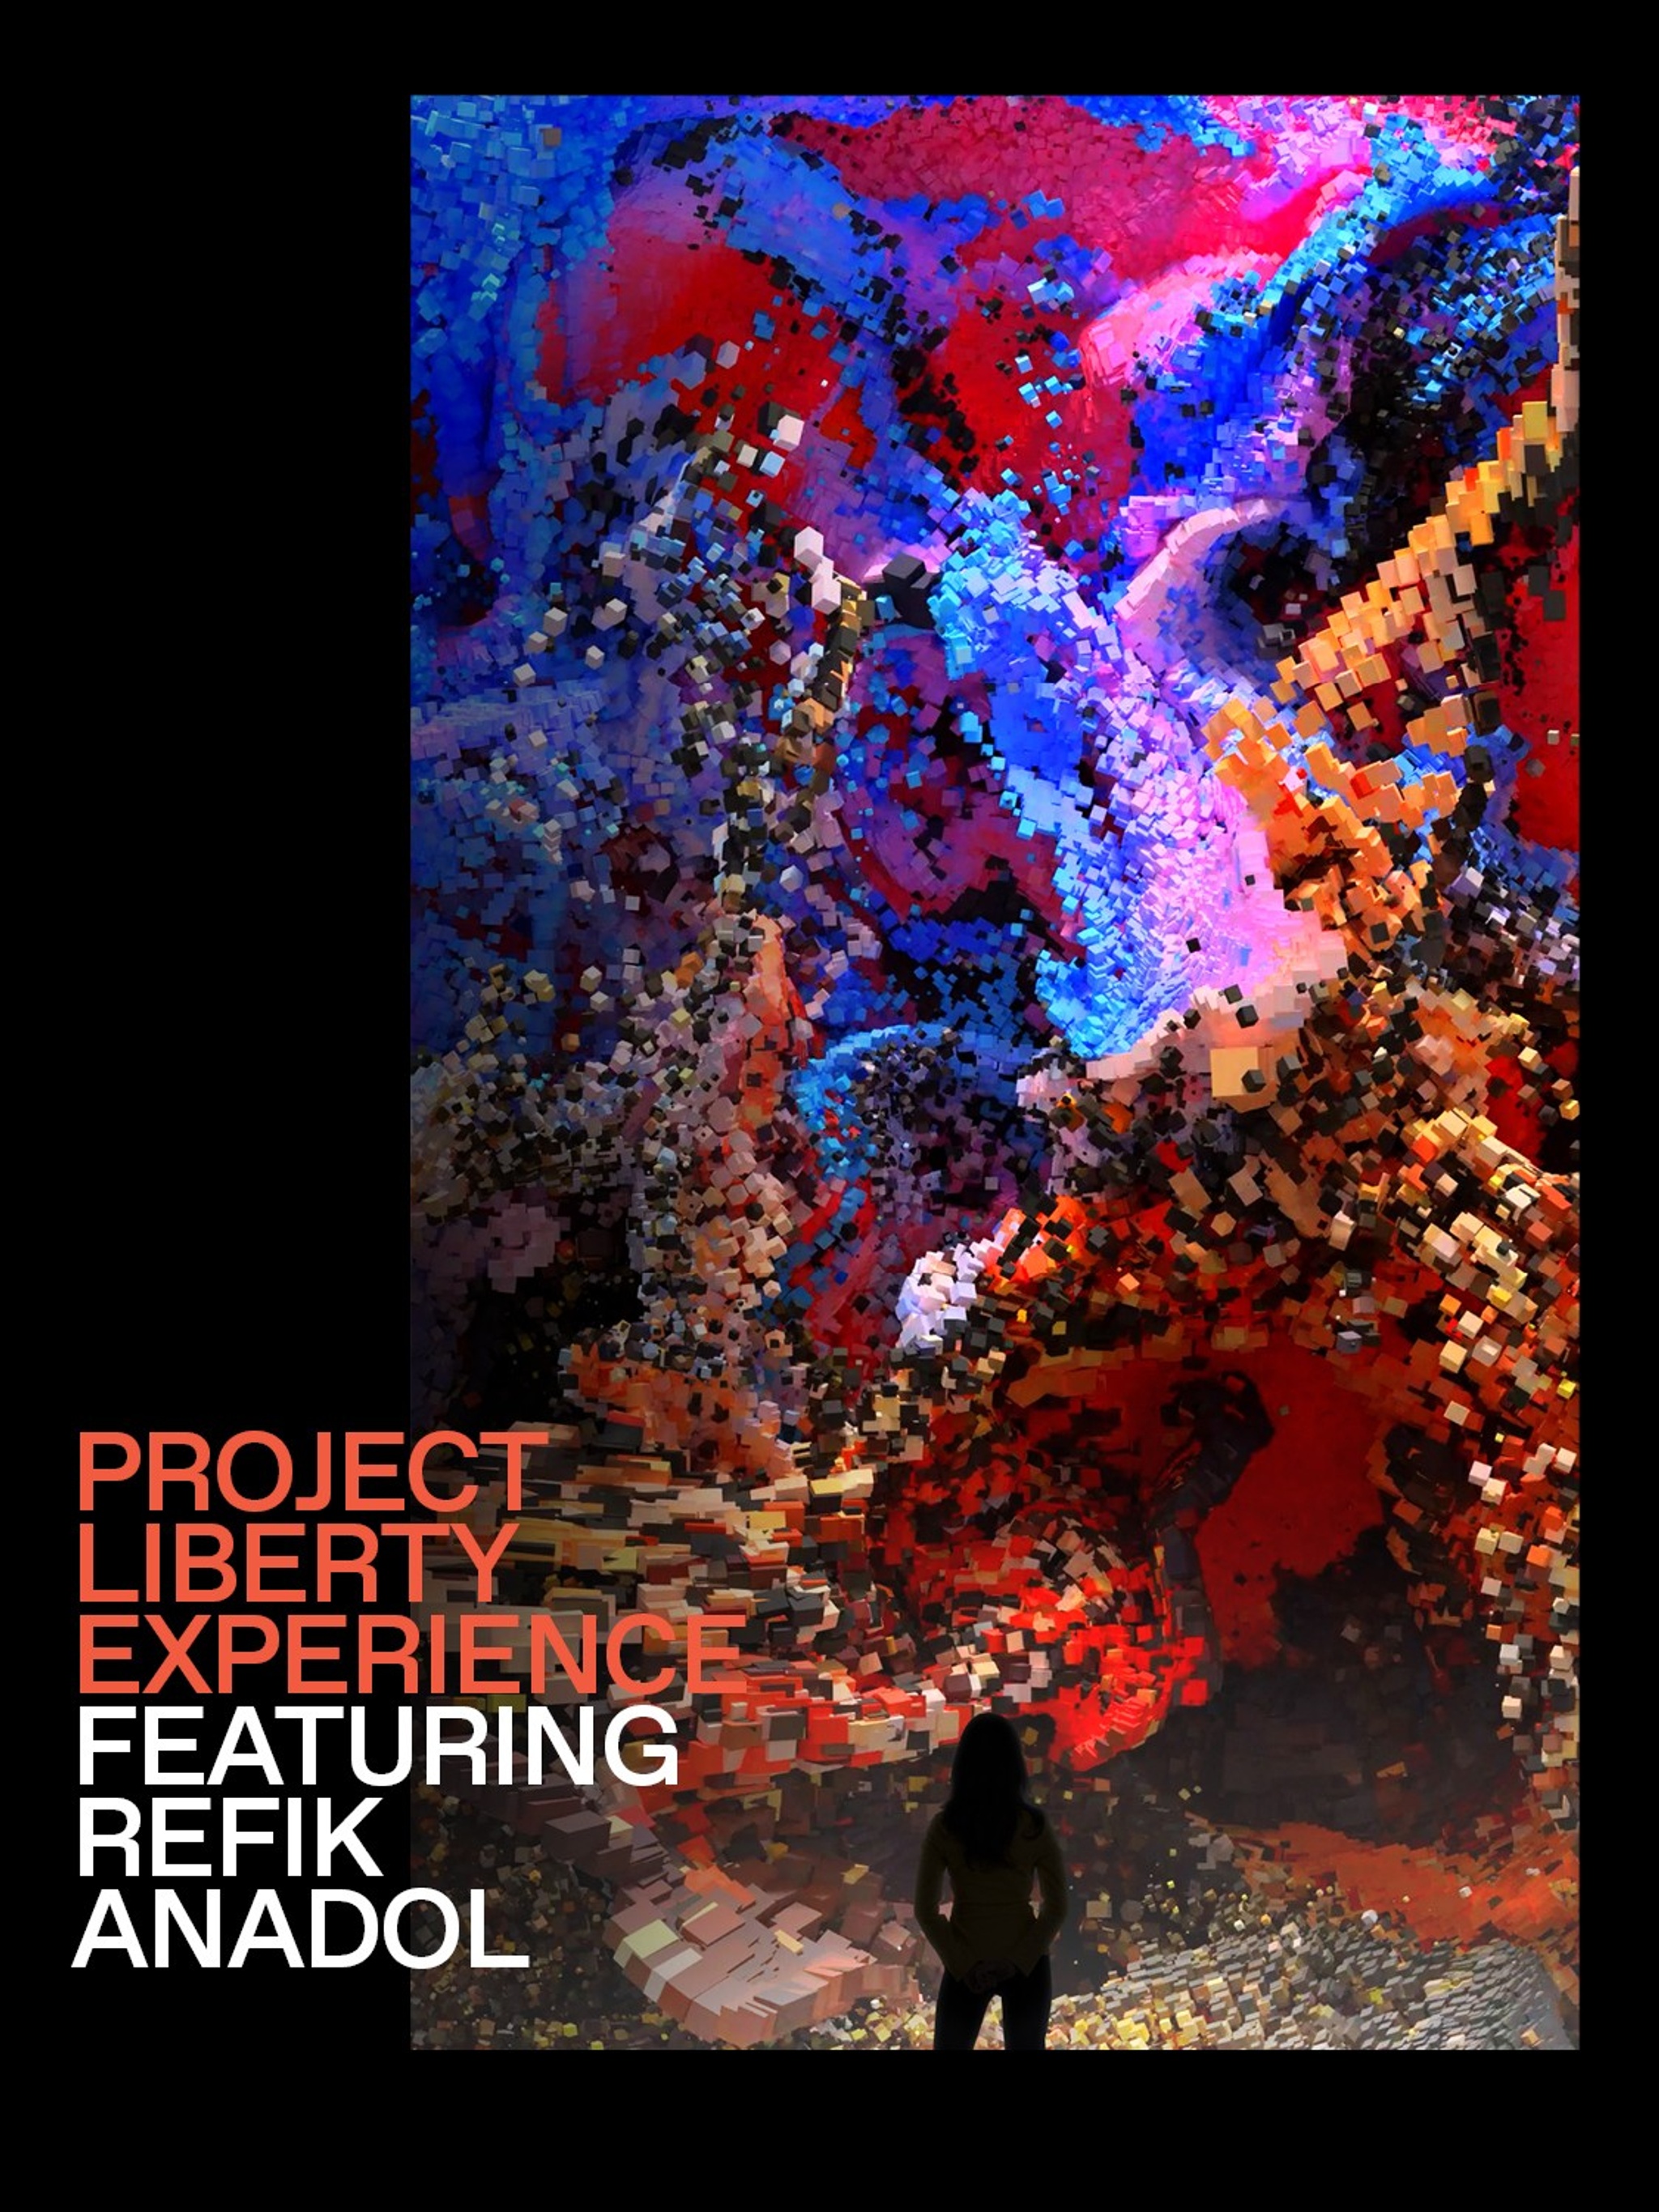 The silhouette of a person against a tall colorful video installation, overlaid is the title "Project Liberty Experience featuring Refik Anadol"